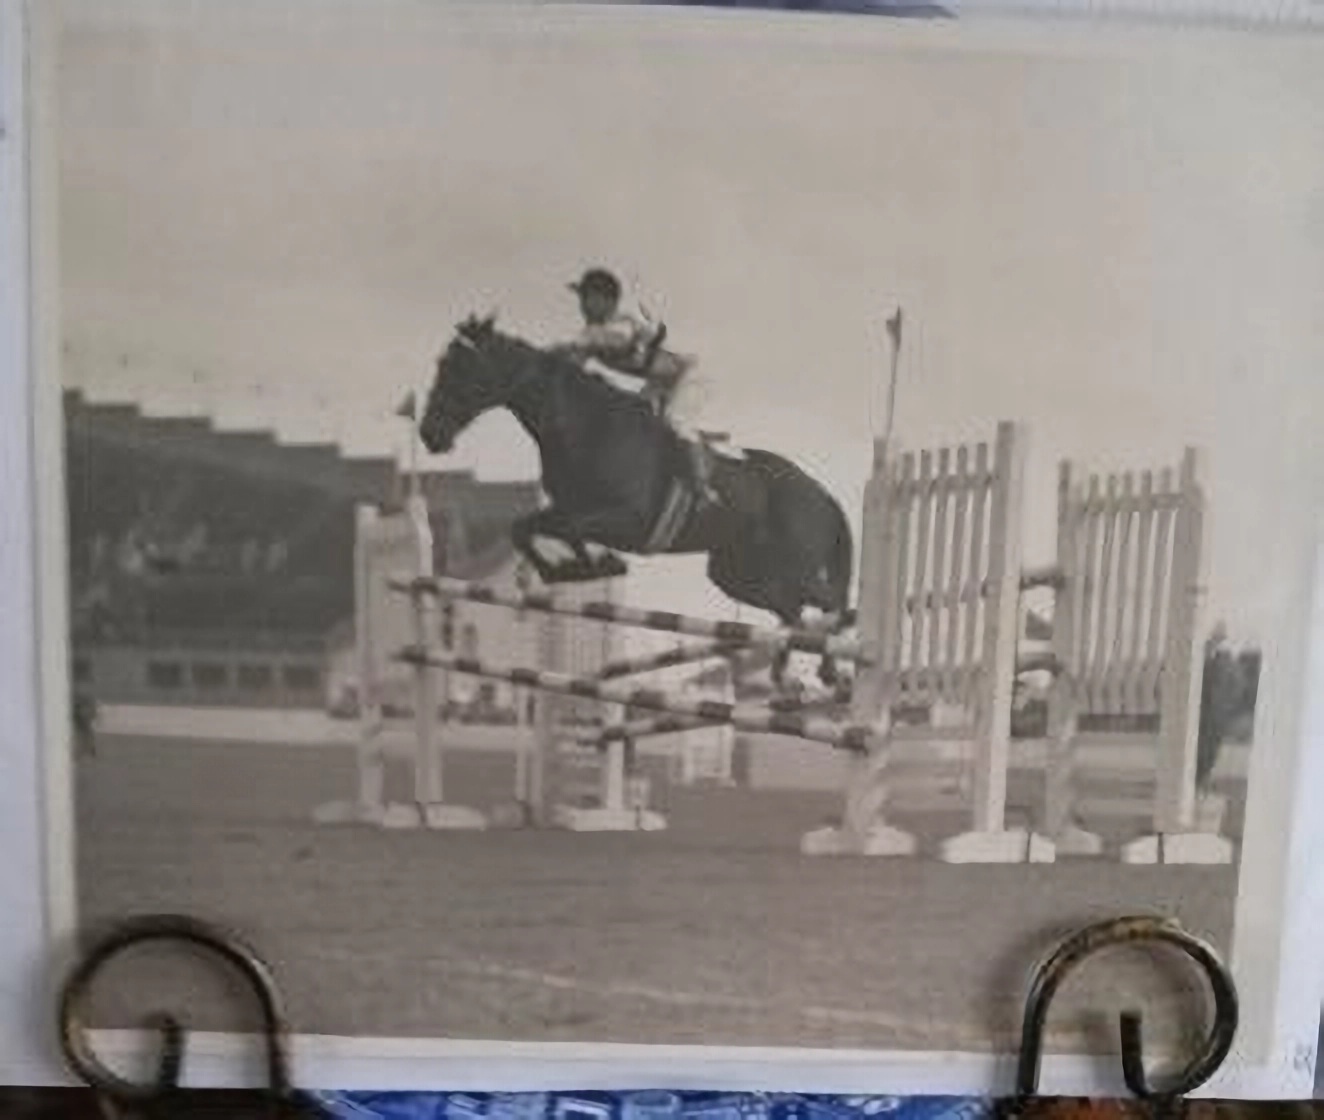 Allan Peach riding Sleet Bank At Melbourne Royal Show jumping A Huge Spread, Height was 6ft